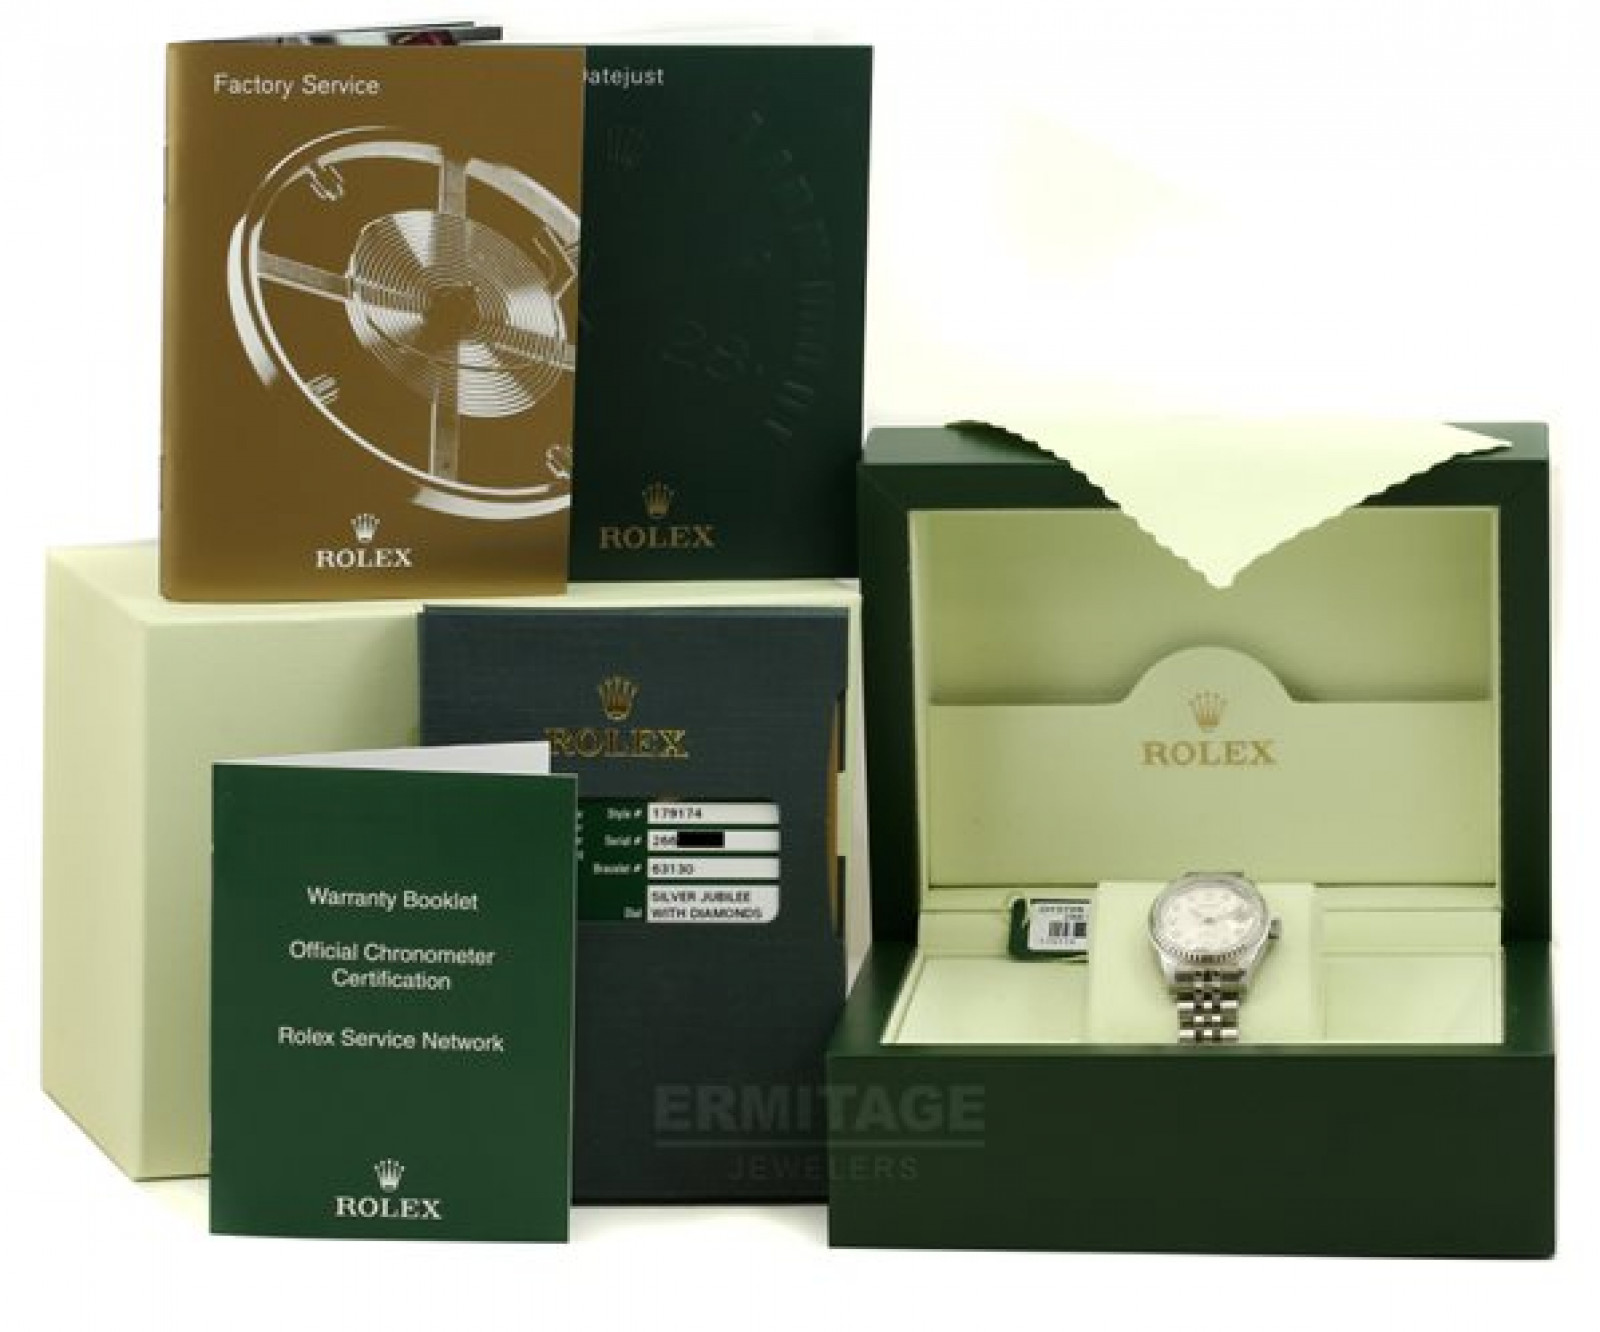 Diamond Dial Pre-Owned Rolex Datejust 179174